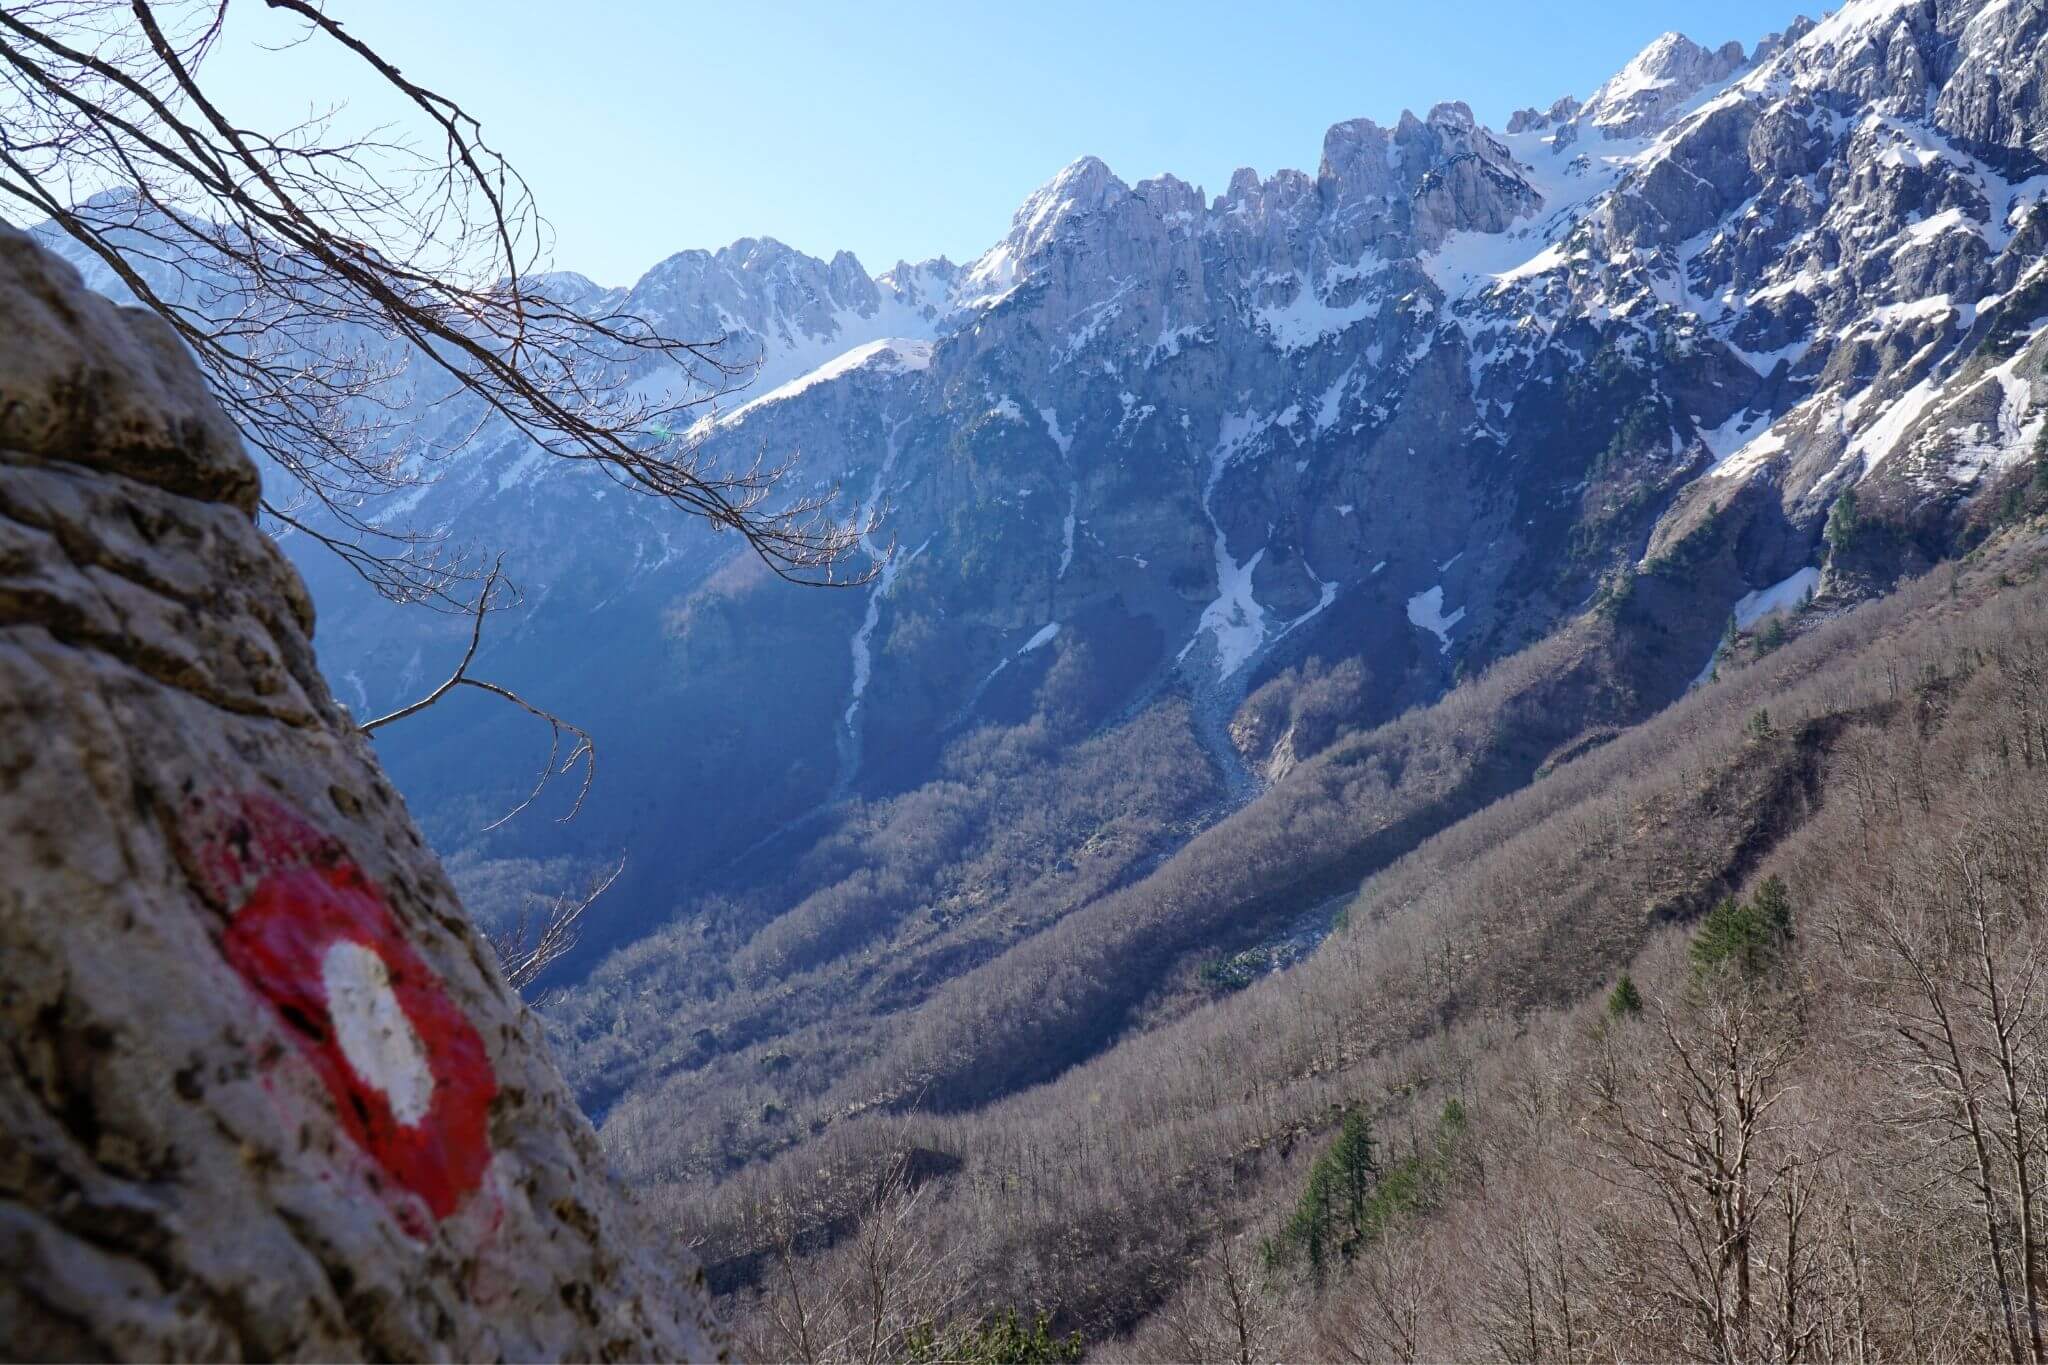 Hiking trail markers for Valbona to Theth hike